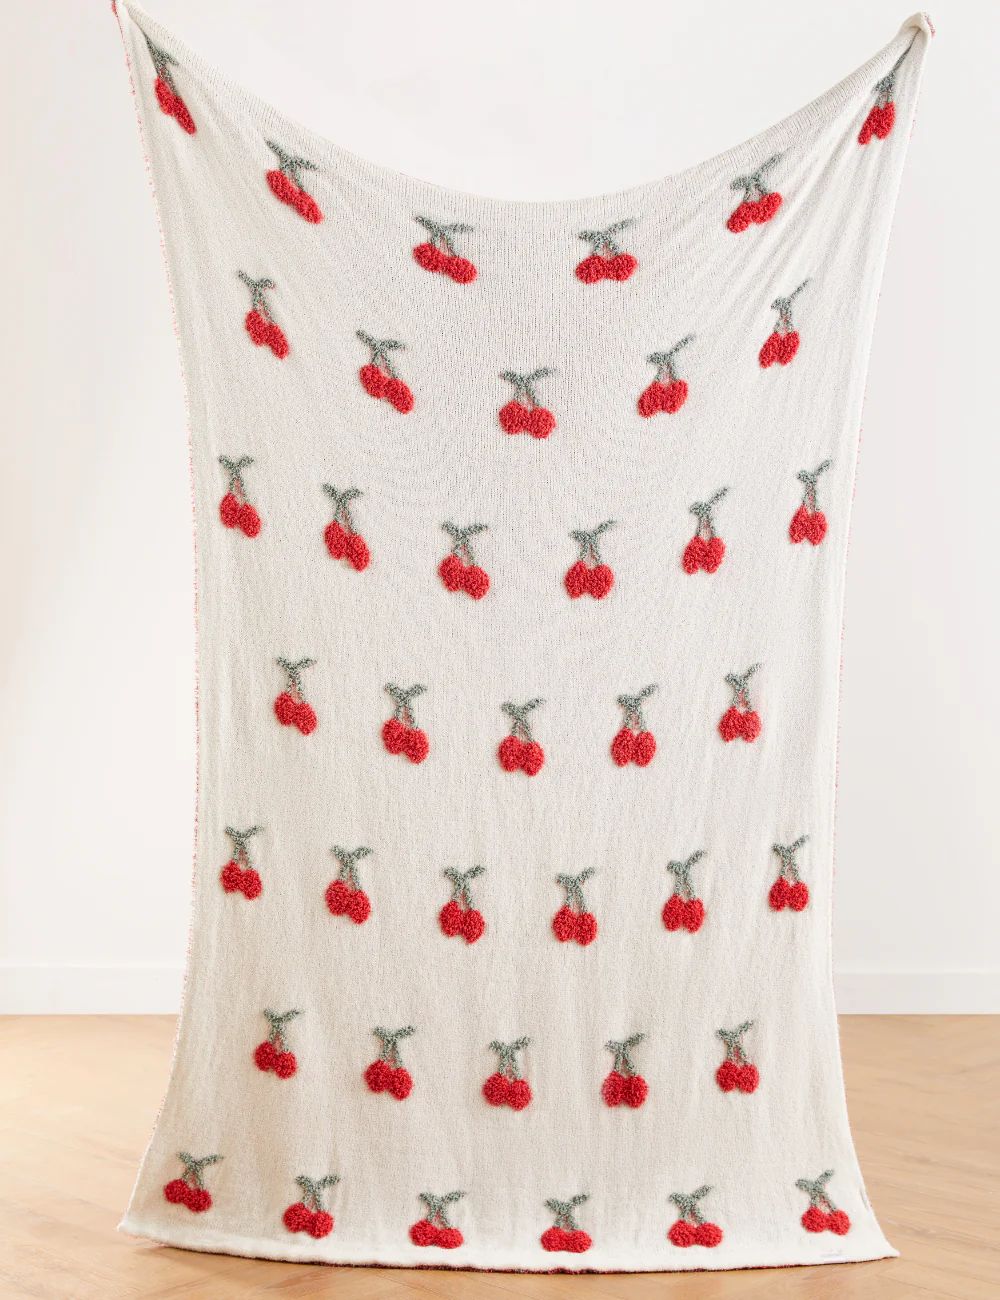 Cherries Buttery Blanket | The Styled Collection